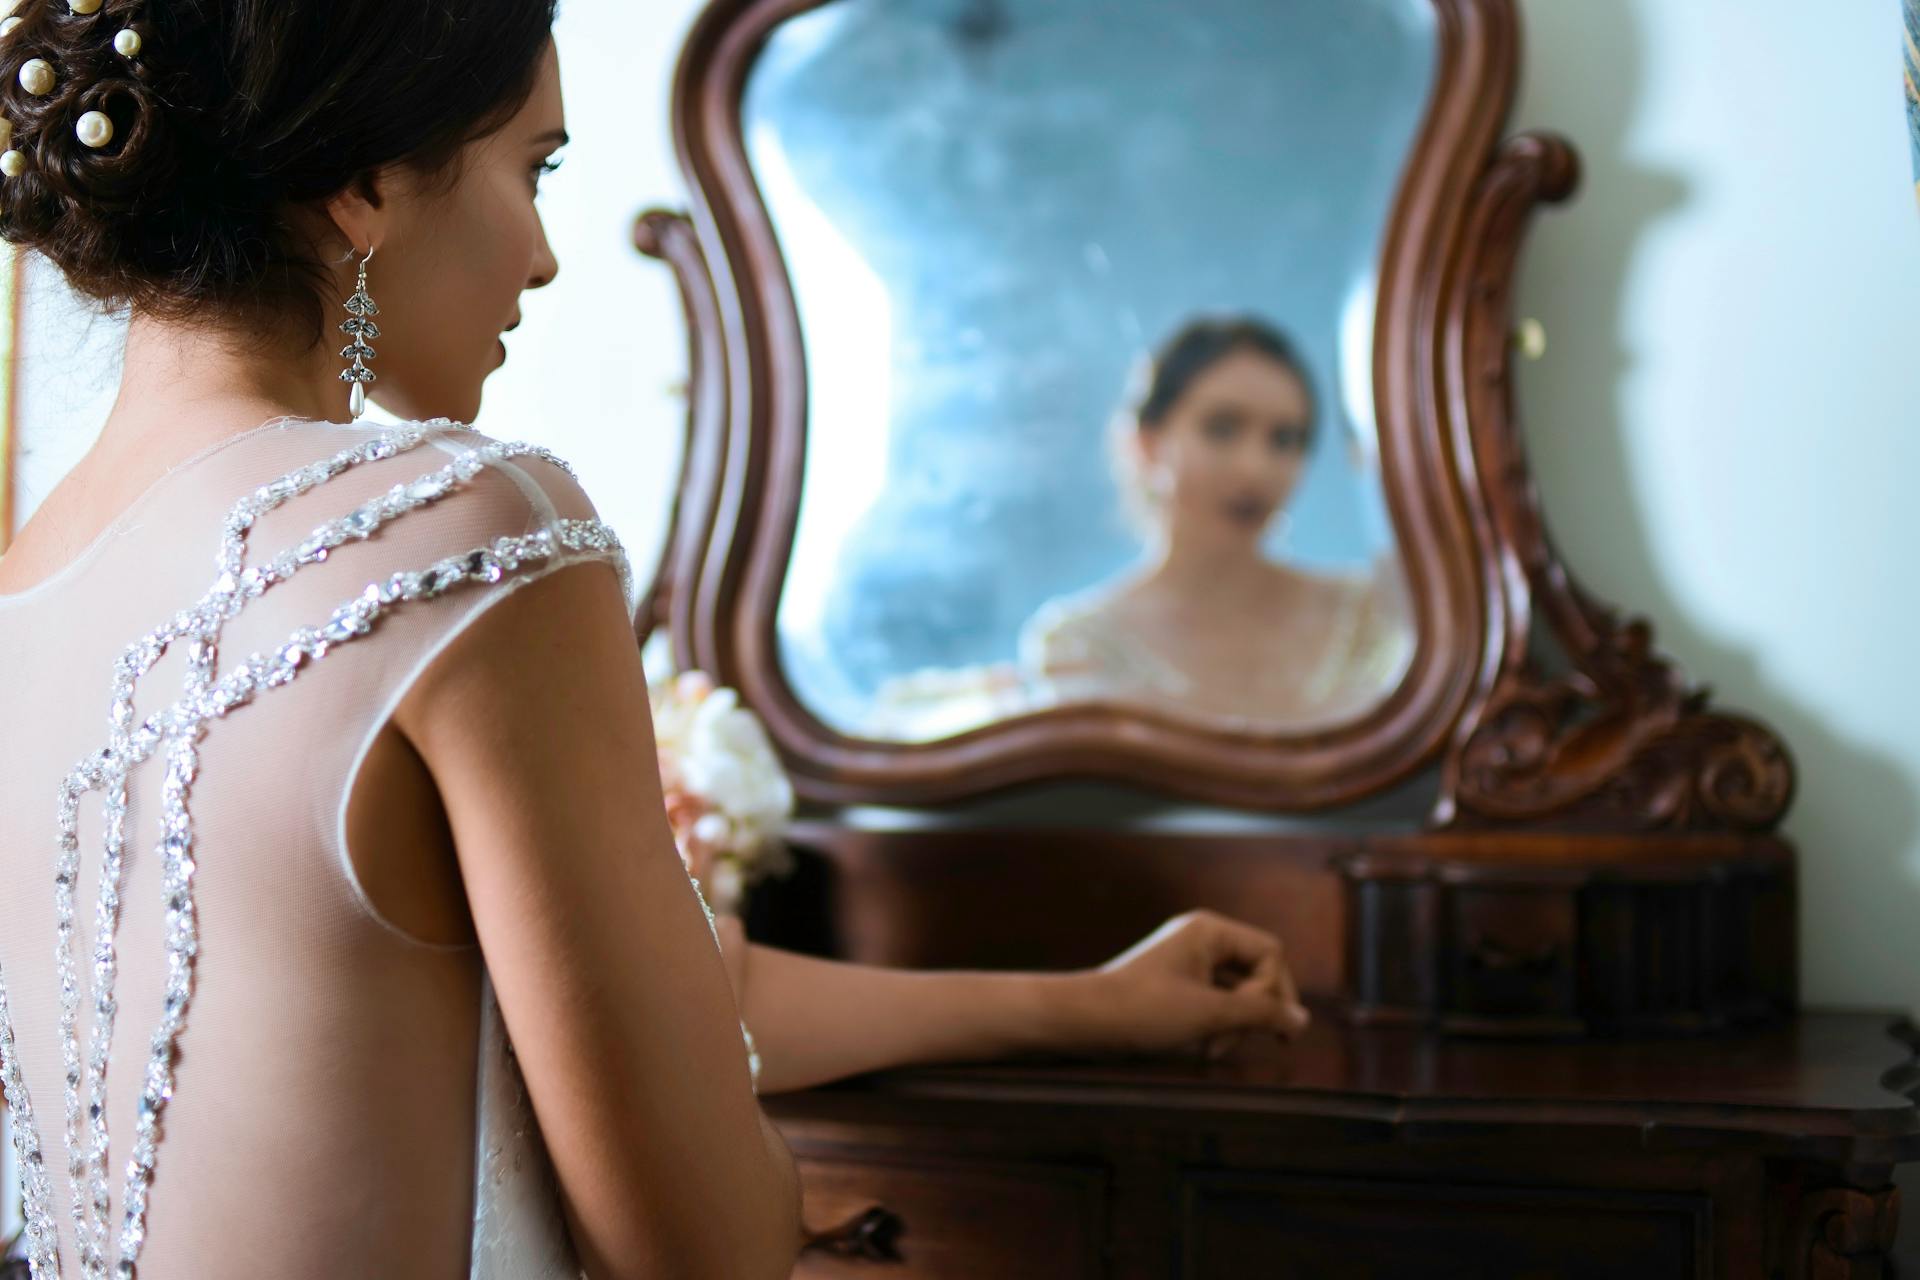 A bride looking at herself in the mirror | Source: Pexels